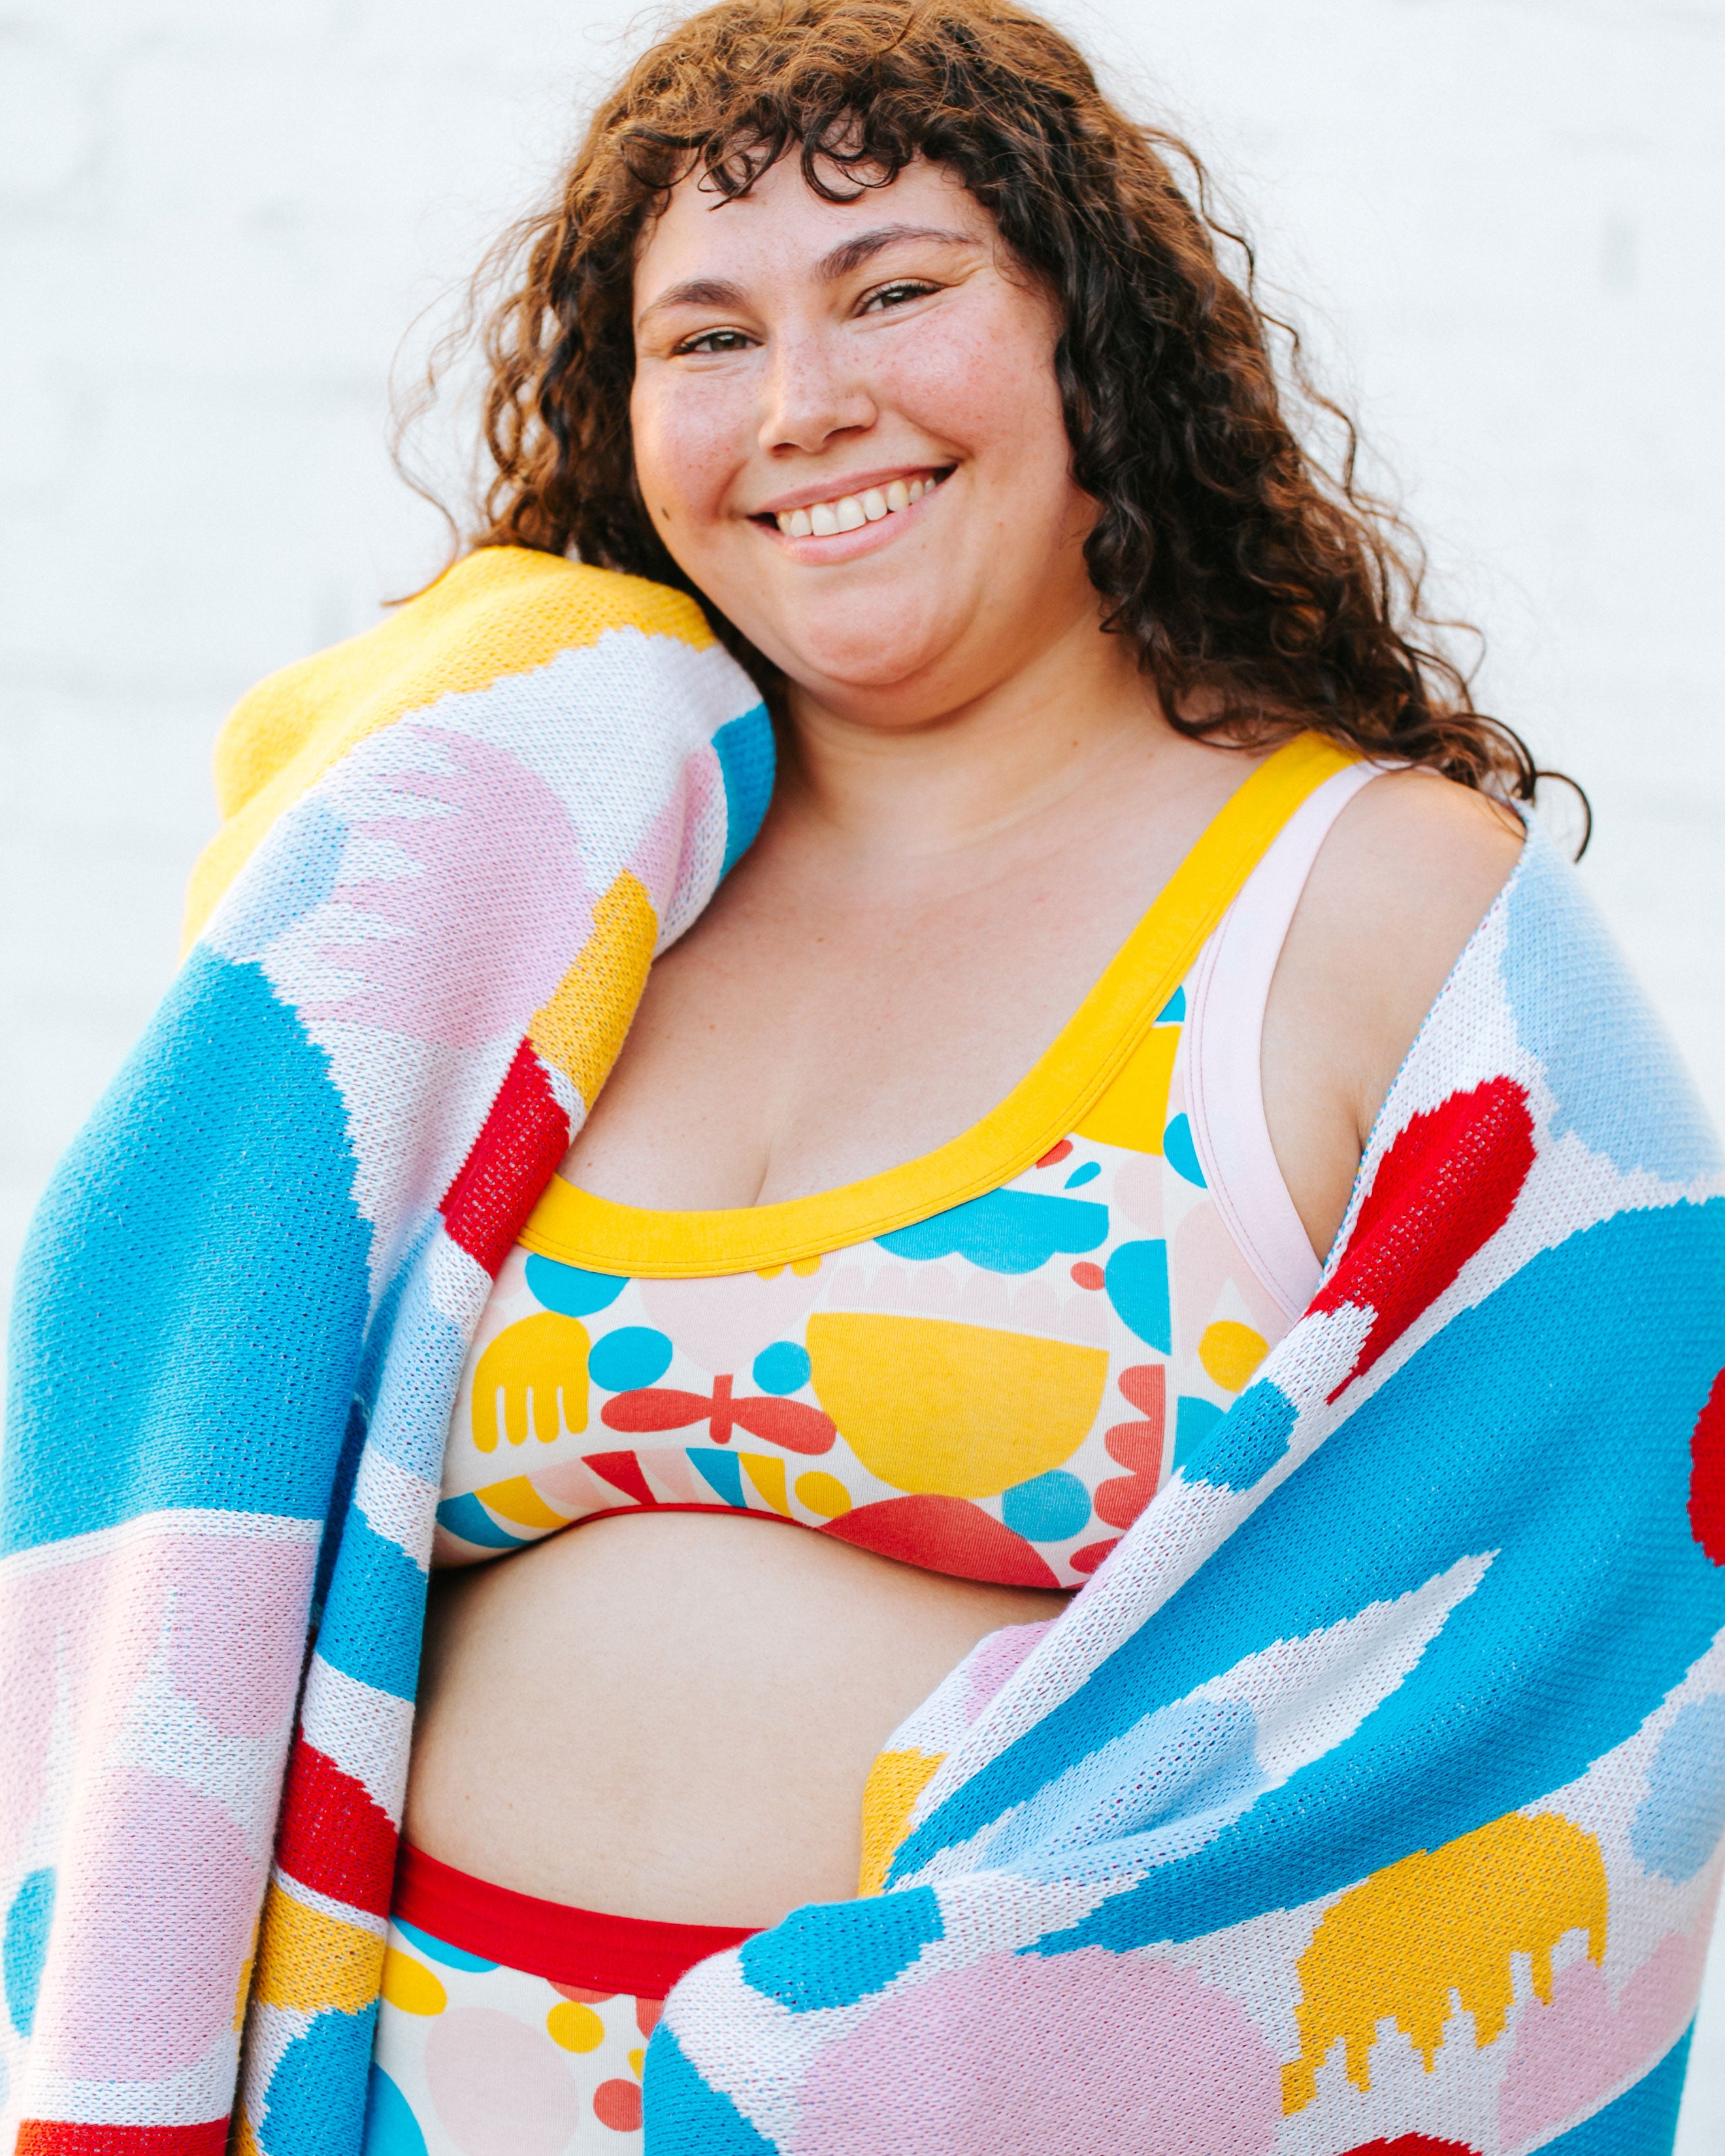 Close up of model happy wearing Bralette in Balance by Lisa Congdon: geometric shapes in red, yellow, pink, and blue colors, with a similar blanket around her shoulders.